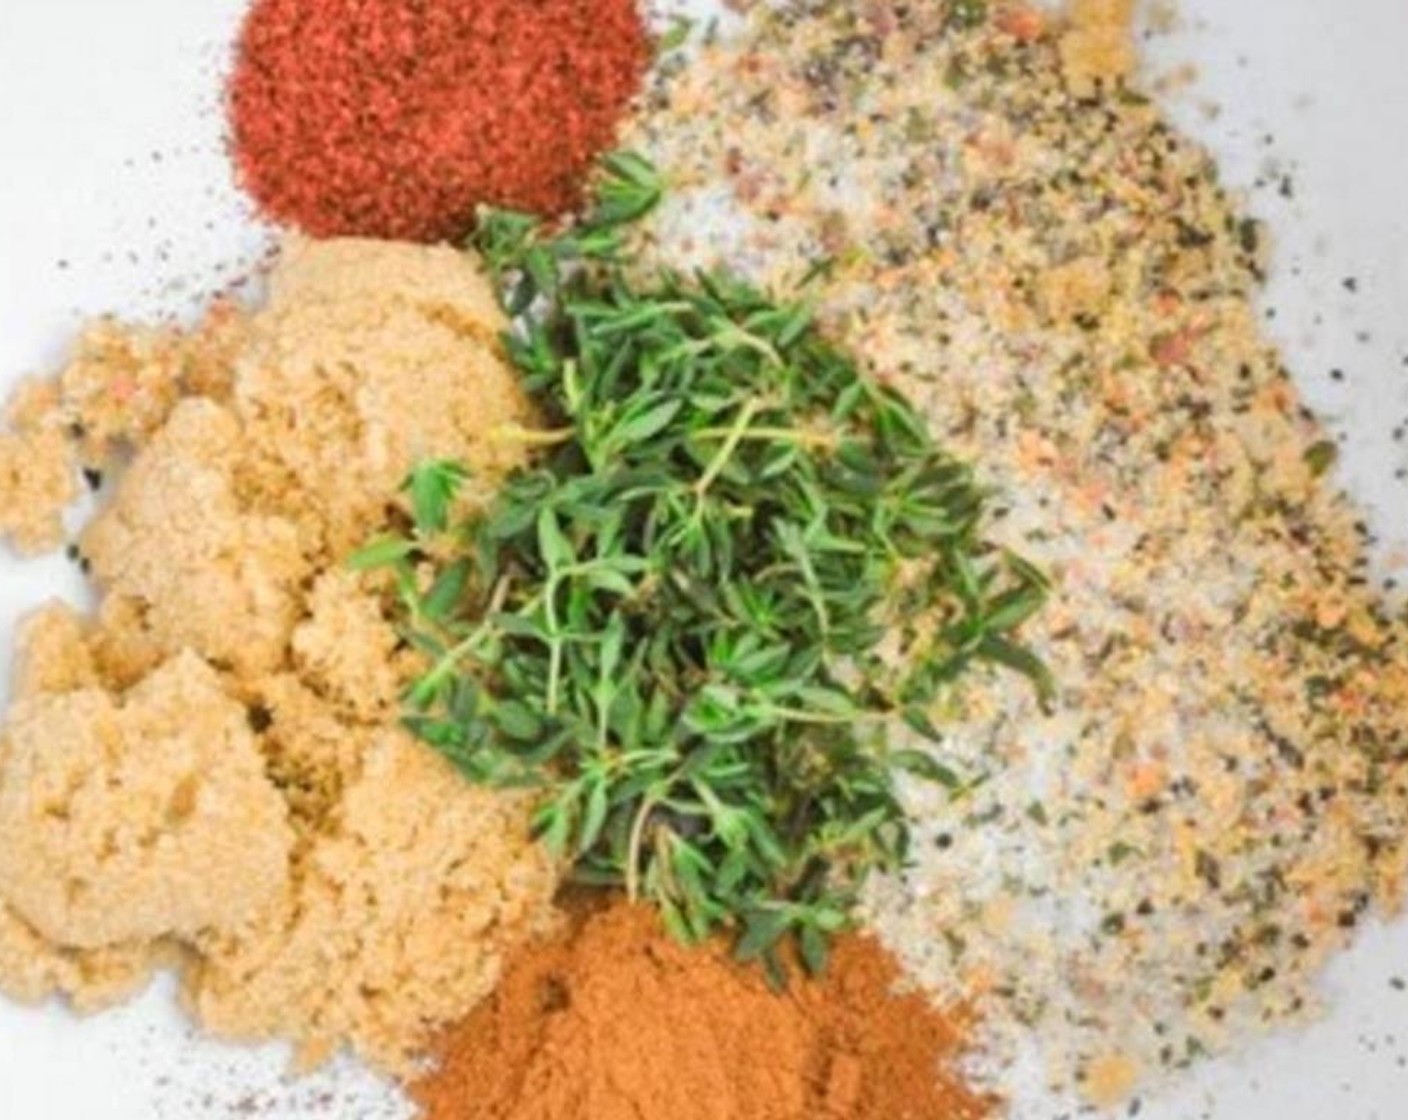 step 2 For The Marinade: Add Dry Italian Salad Dressing Mix (1 packet), Ground Cinnamon (1 tsp), Fresh Thyme Leaves (1 Tbsp), Chili Powder (1/2 tsp), and Brown Sugar (2 Tbsp) in a big mixing bowl.